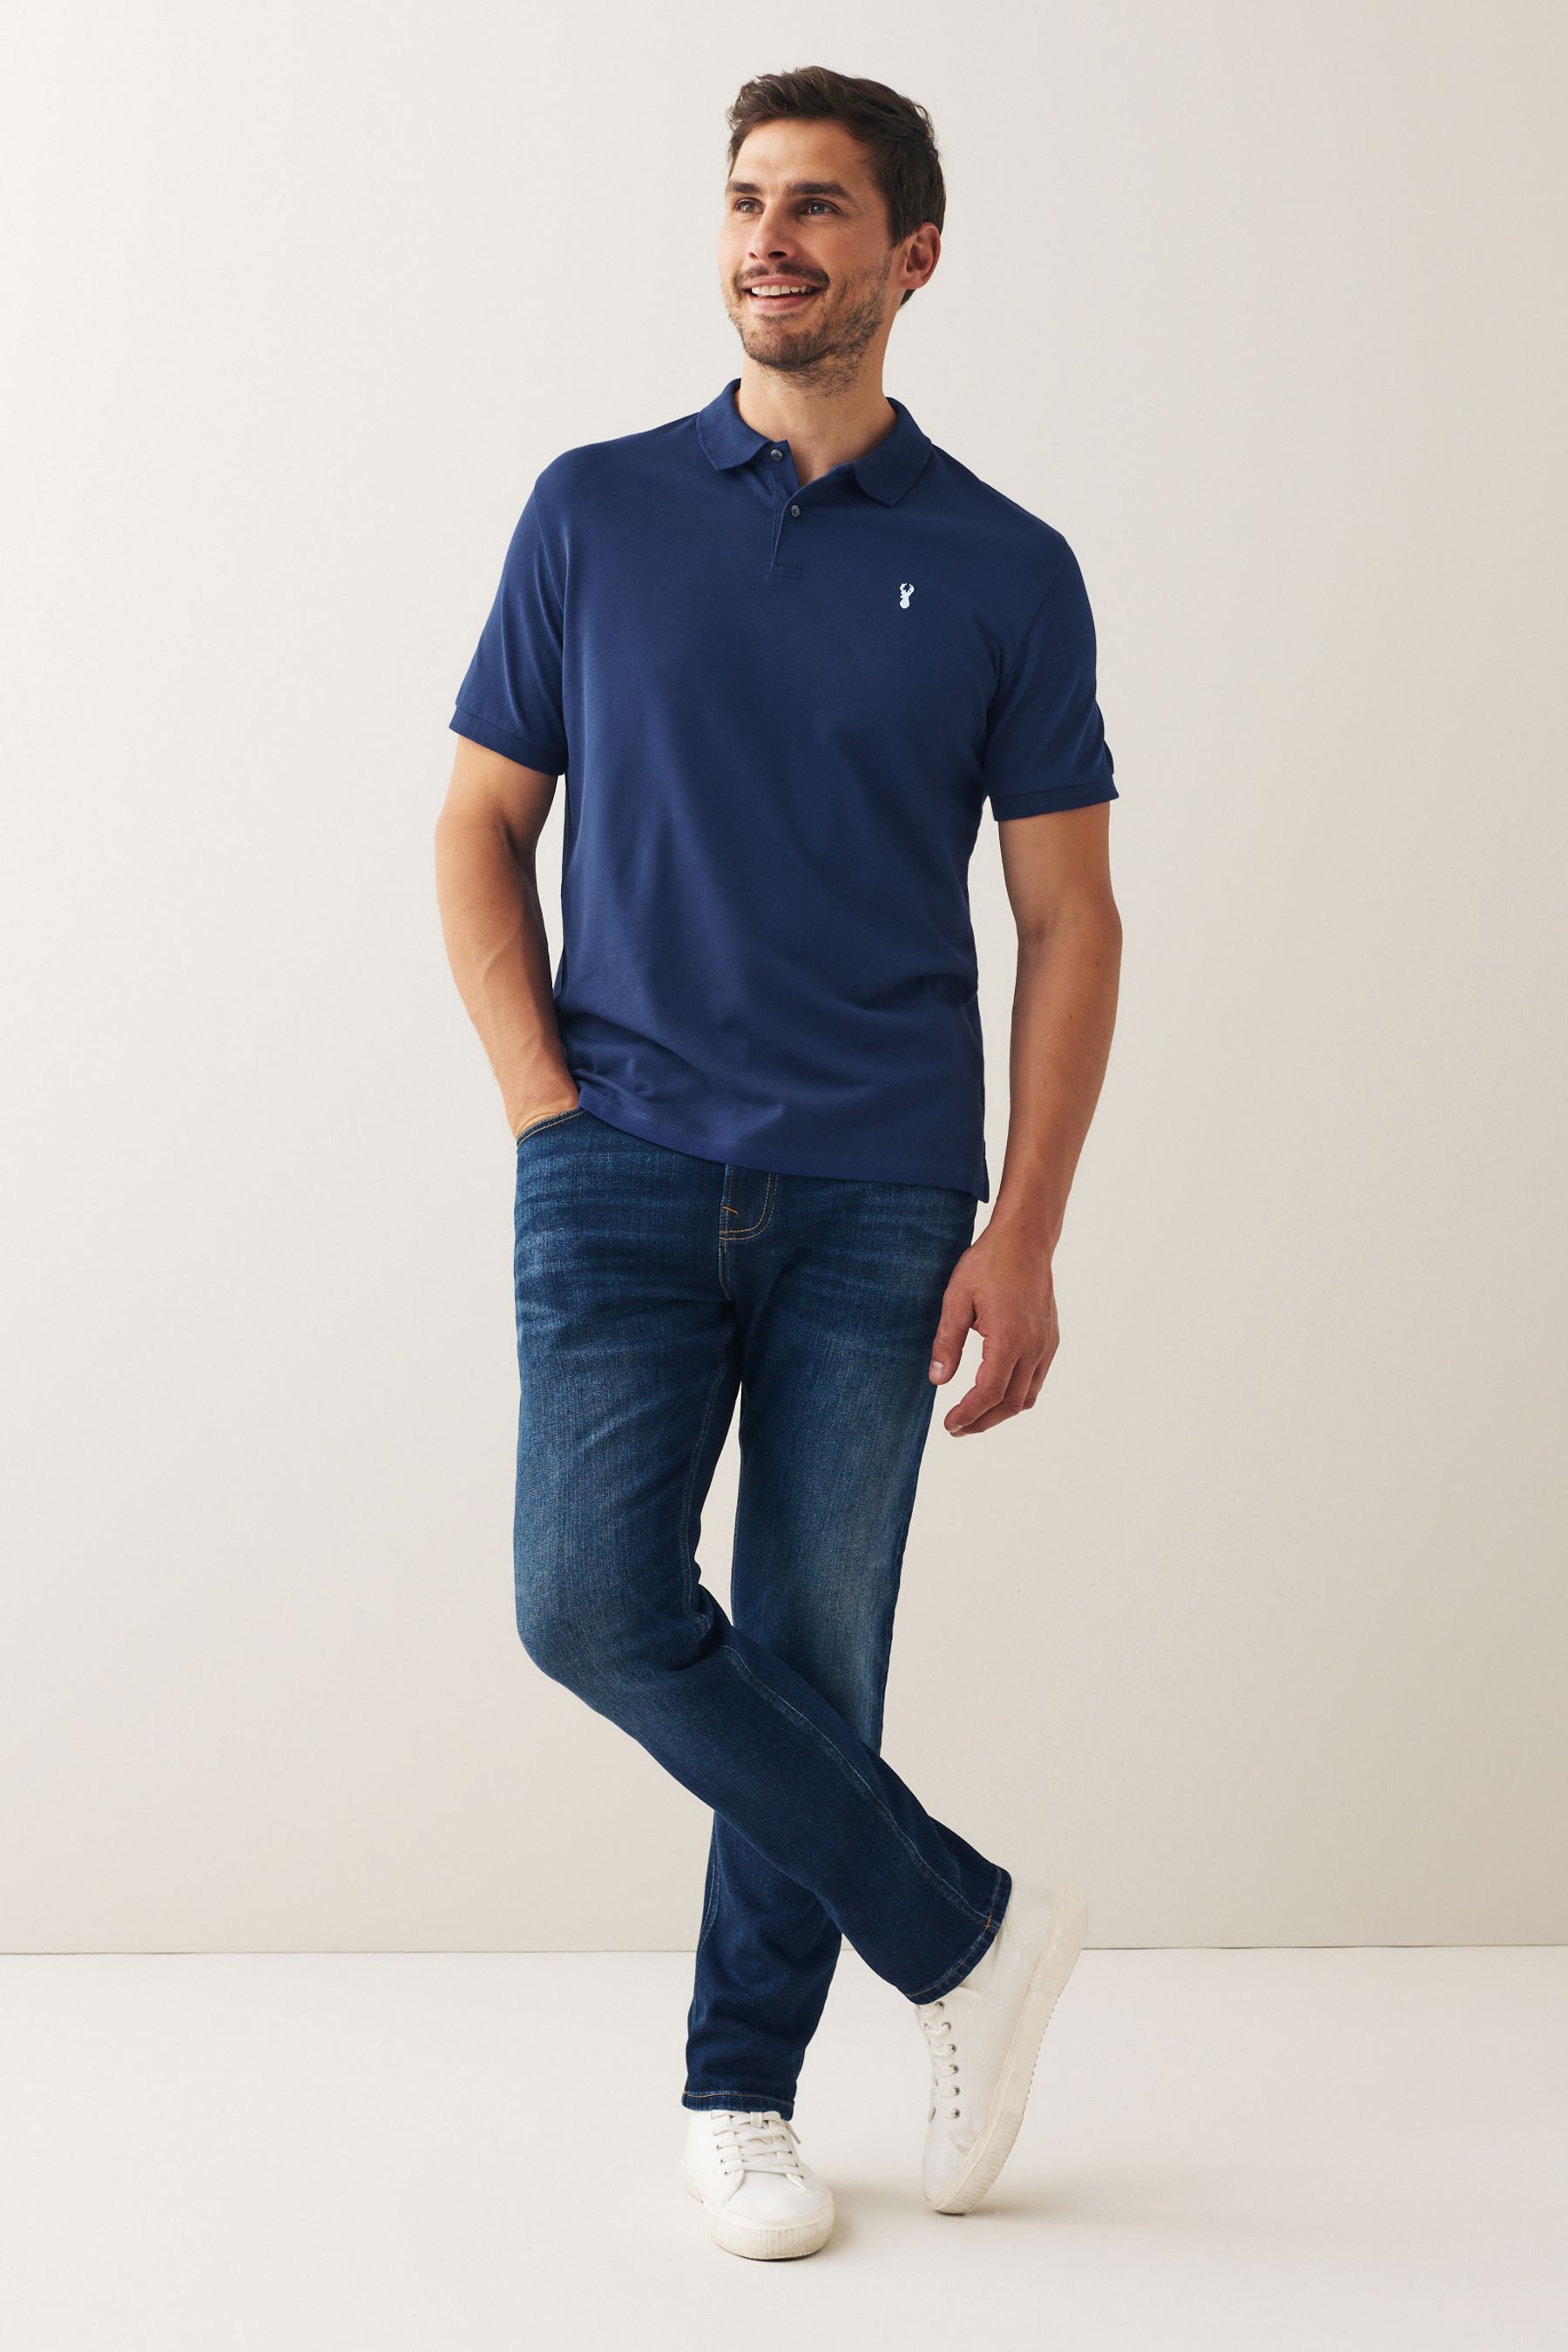 Buy Rich Blue Pique Polo Shirt from the Next UK online shop